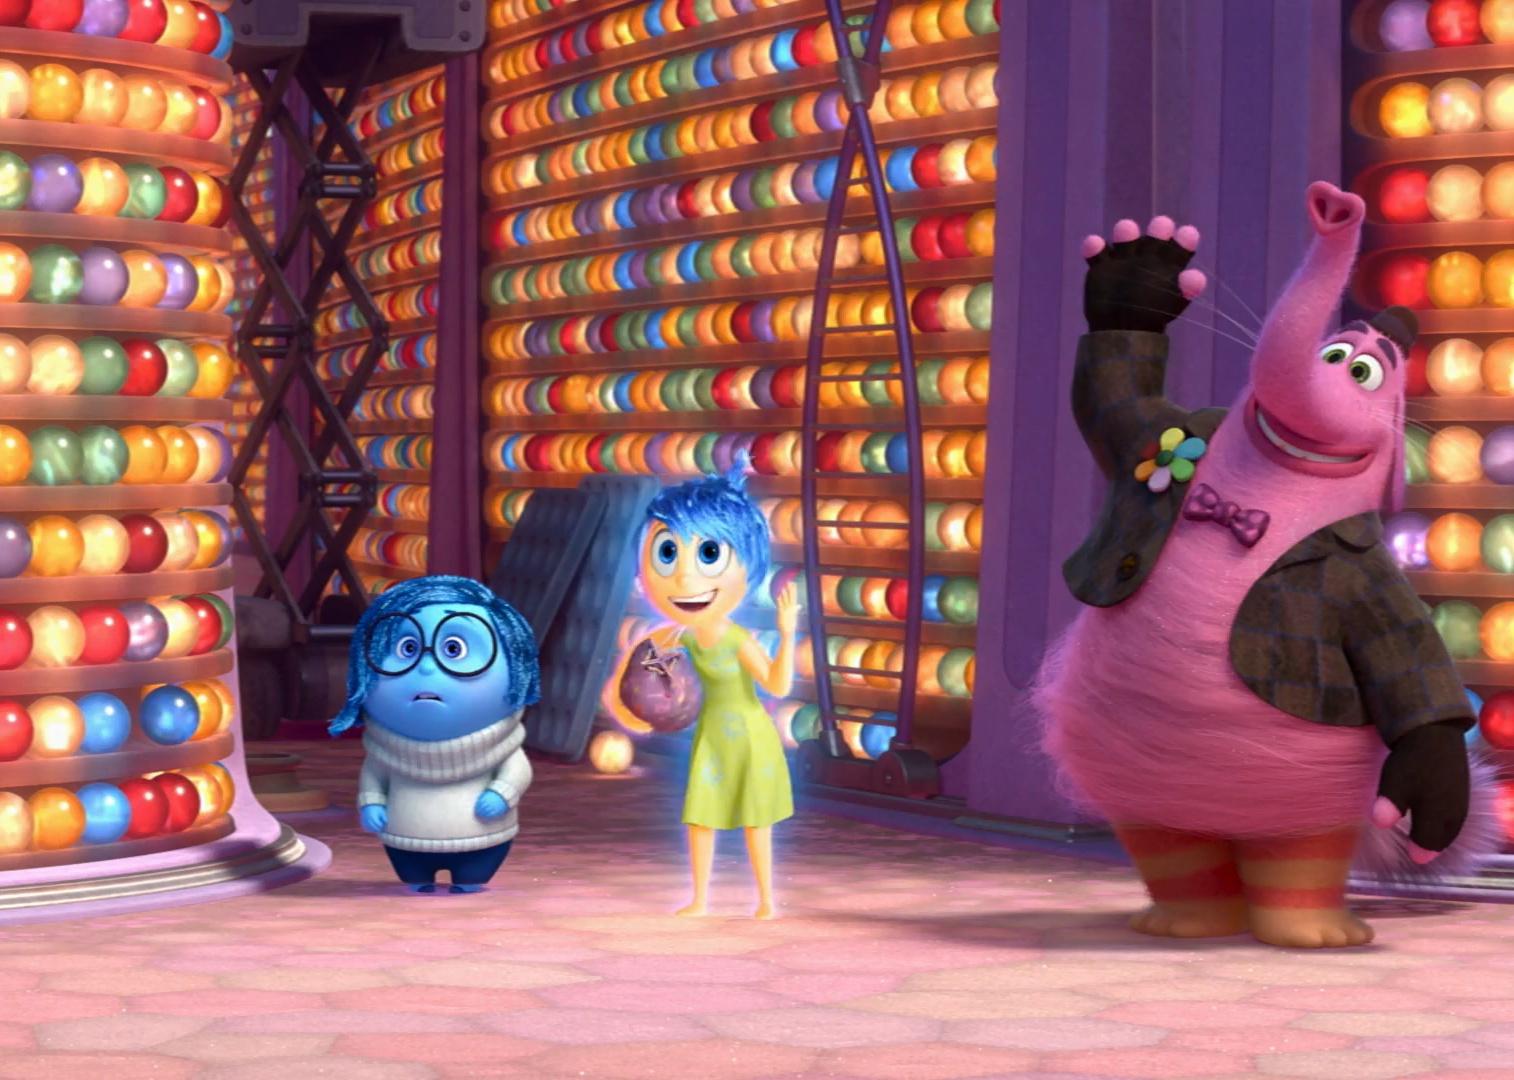 Characters Sadness, Joy, and Bing Bong in a scene from ‘Inside Out.'